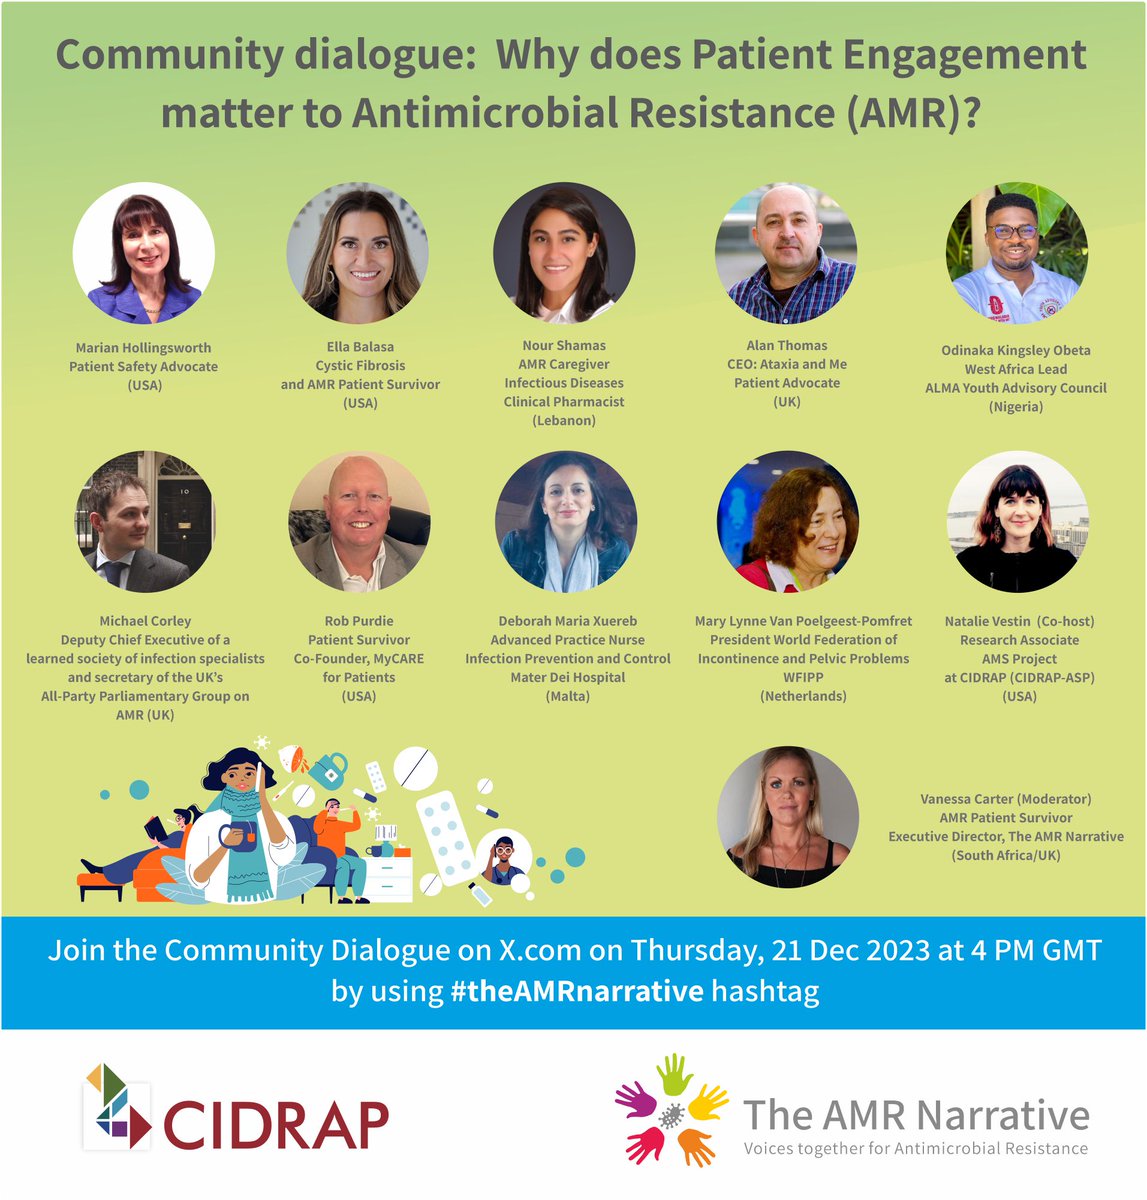 Join the Community Dialogue on X at 4 pm this coming Thurs, 21 Dec to share views about Patient Engagement and #AMR (#AntimicrobialResistance) with our special guests! Everyone welcome! To participate, search for and use the hashtag #theAMRnarrative Read more here: